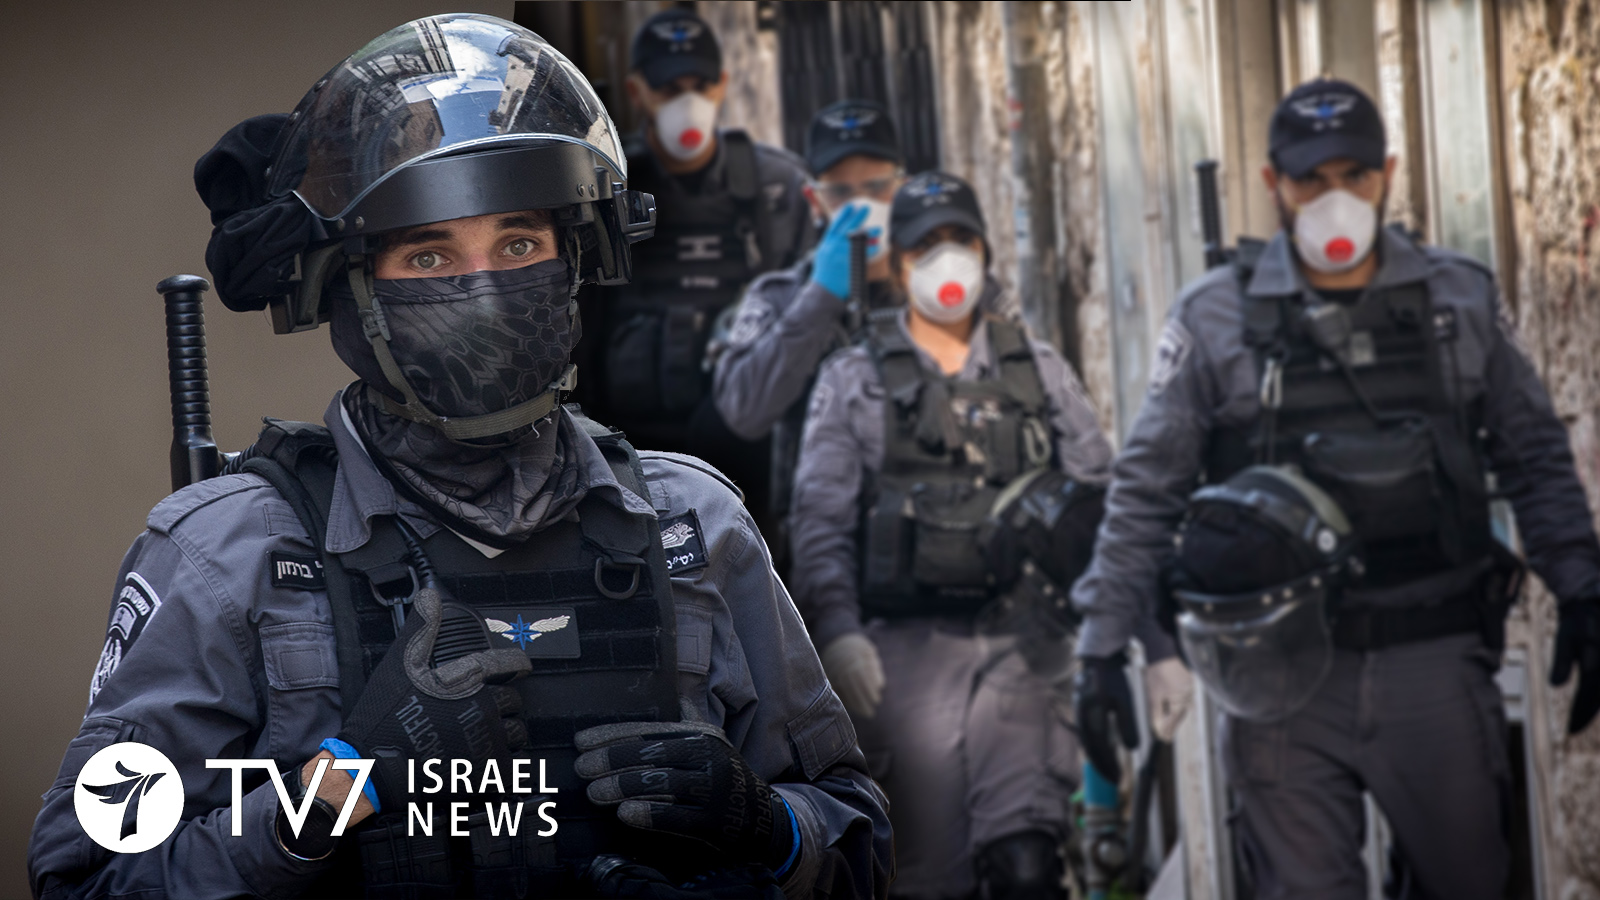 Picture by: tv7israelnews.com